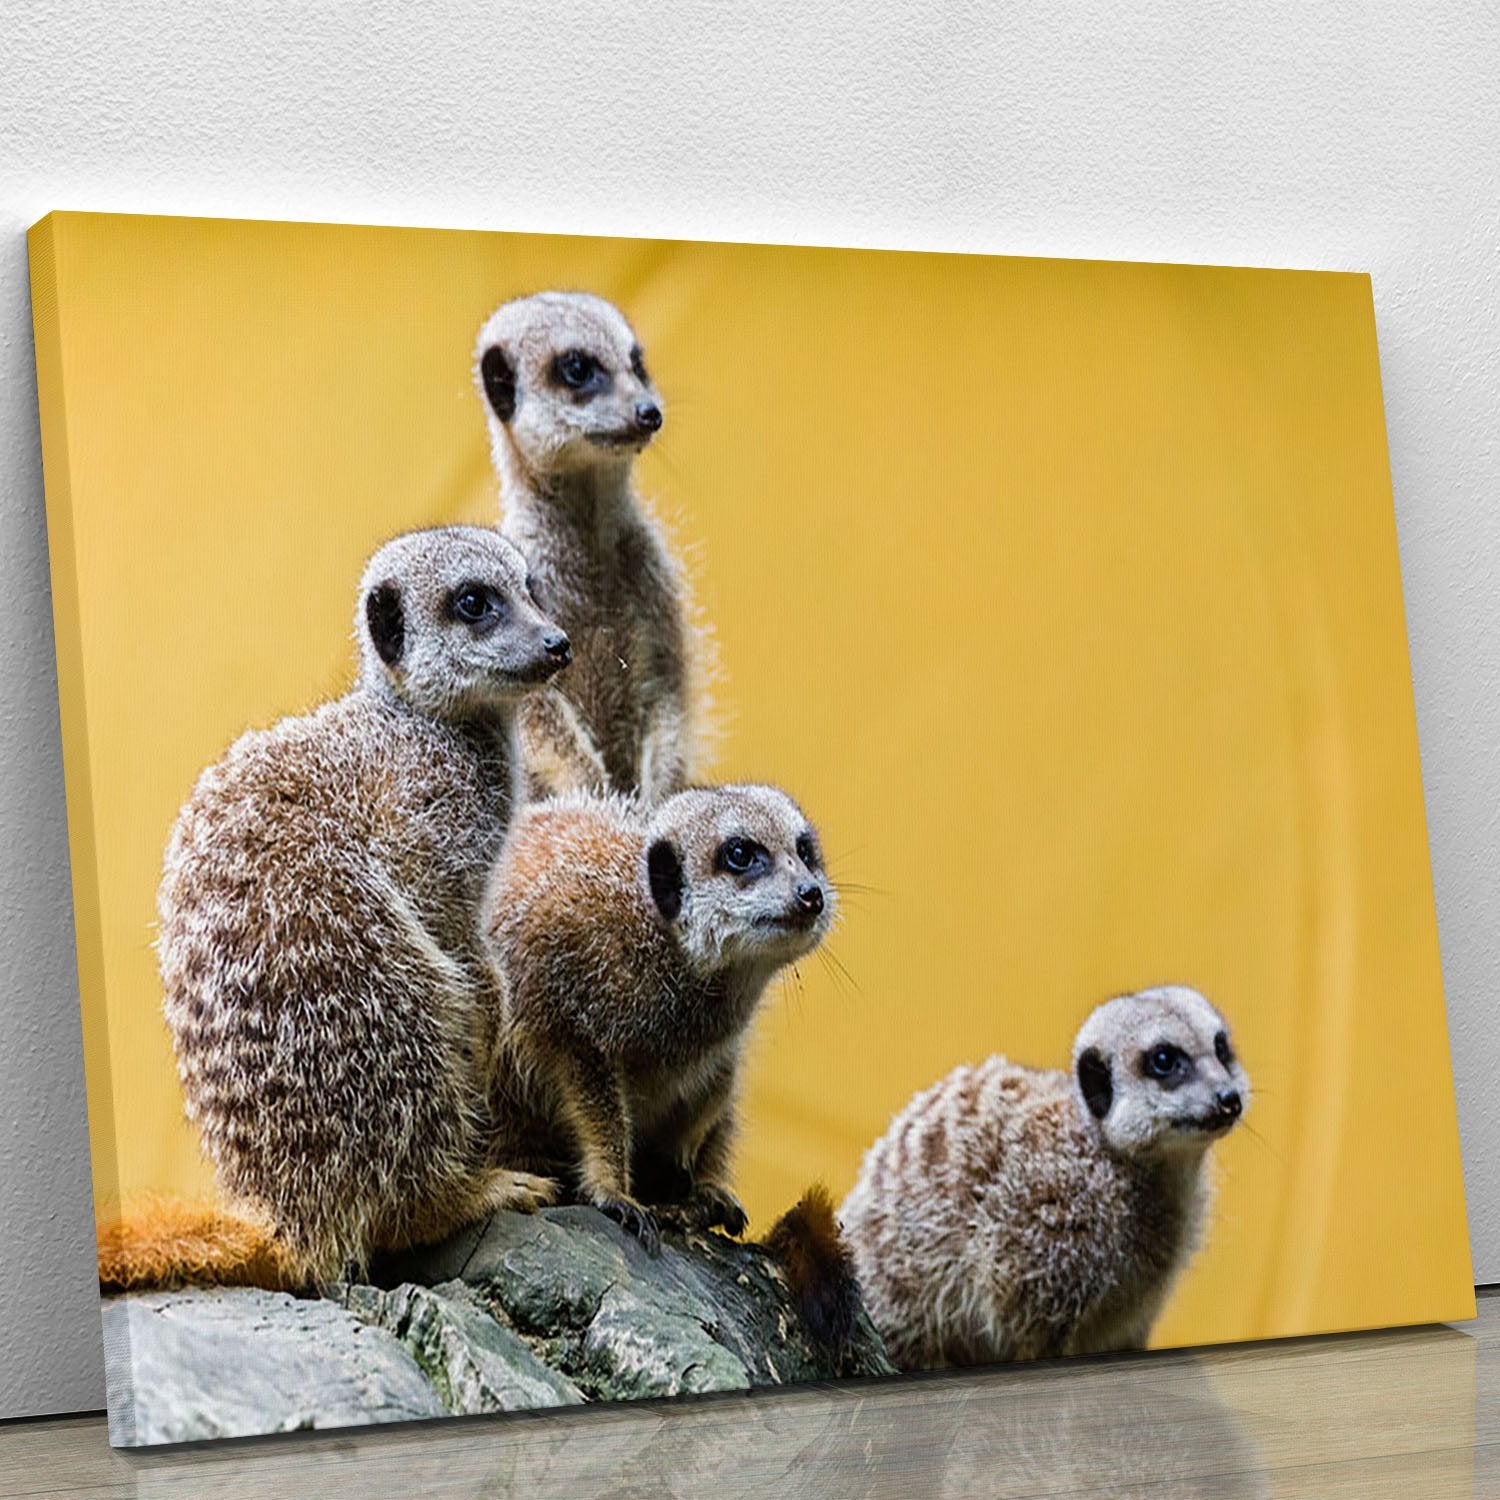 A group of meerkats seen on top of a rock Canvas Print or Poster